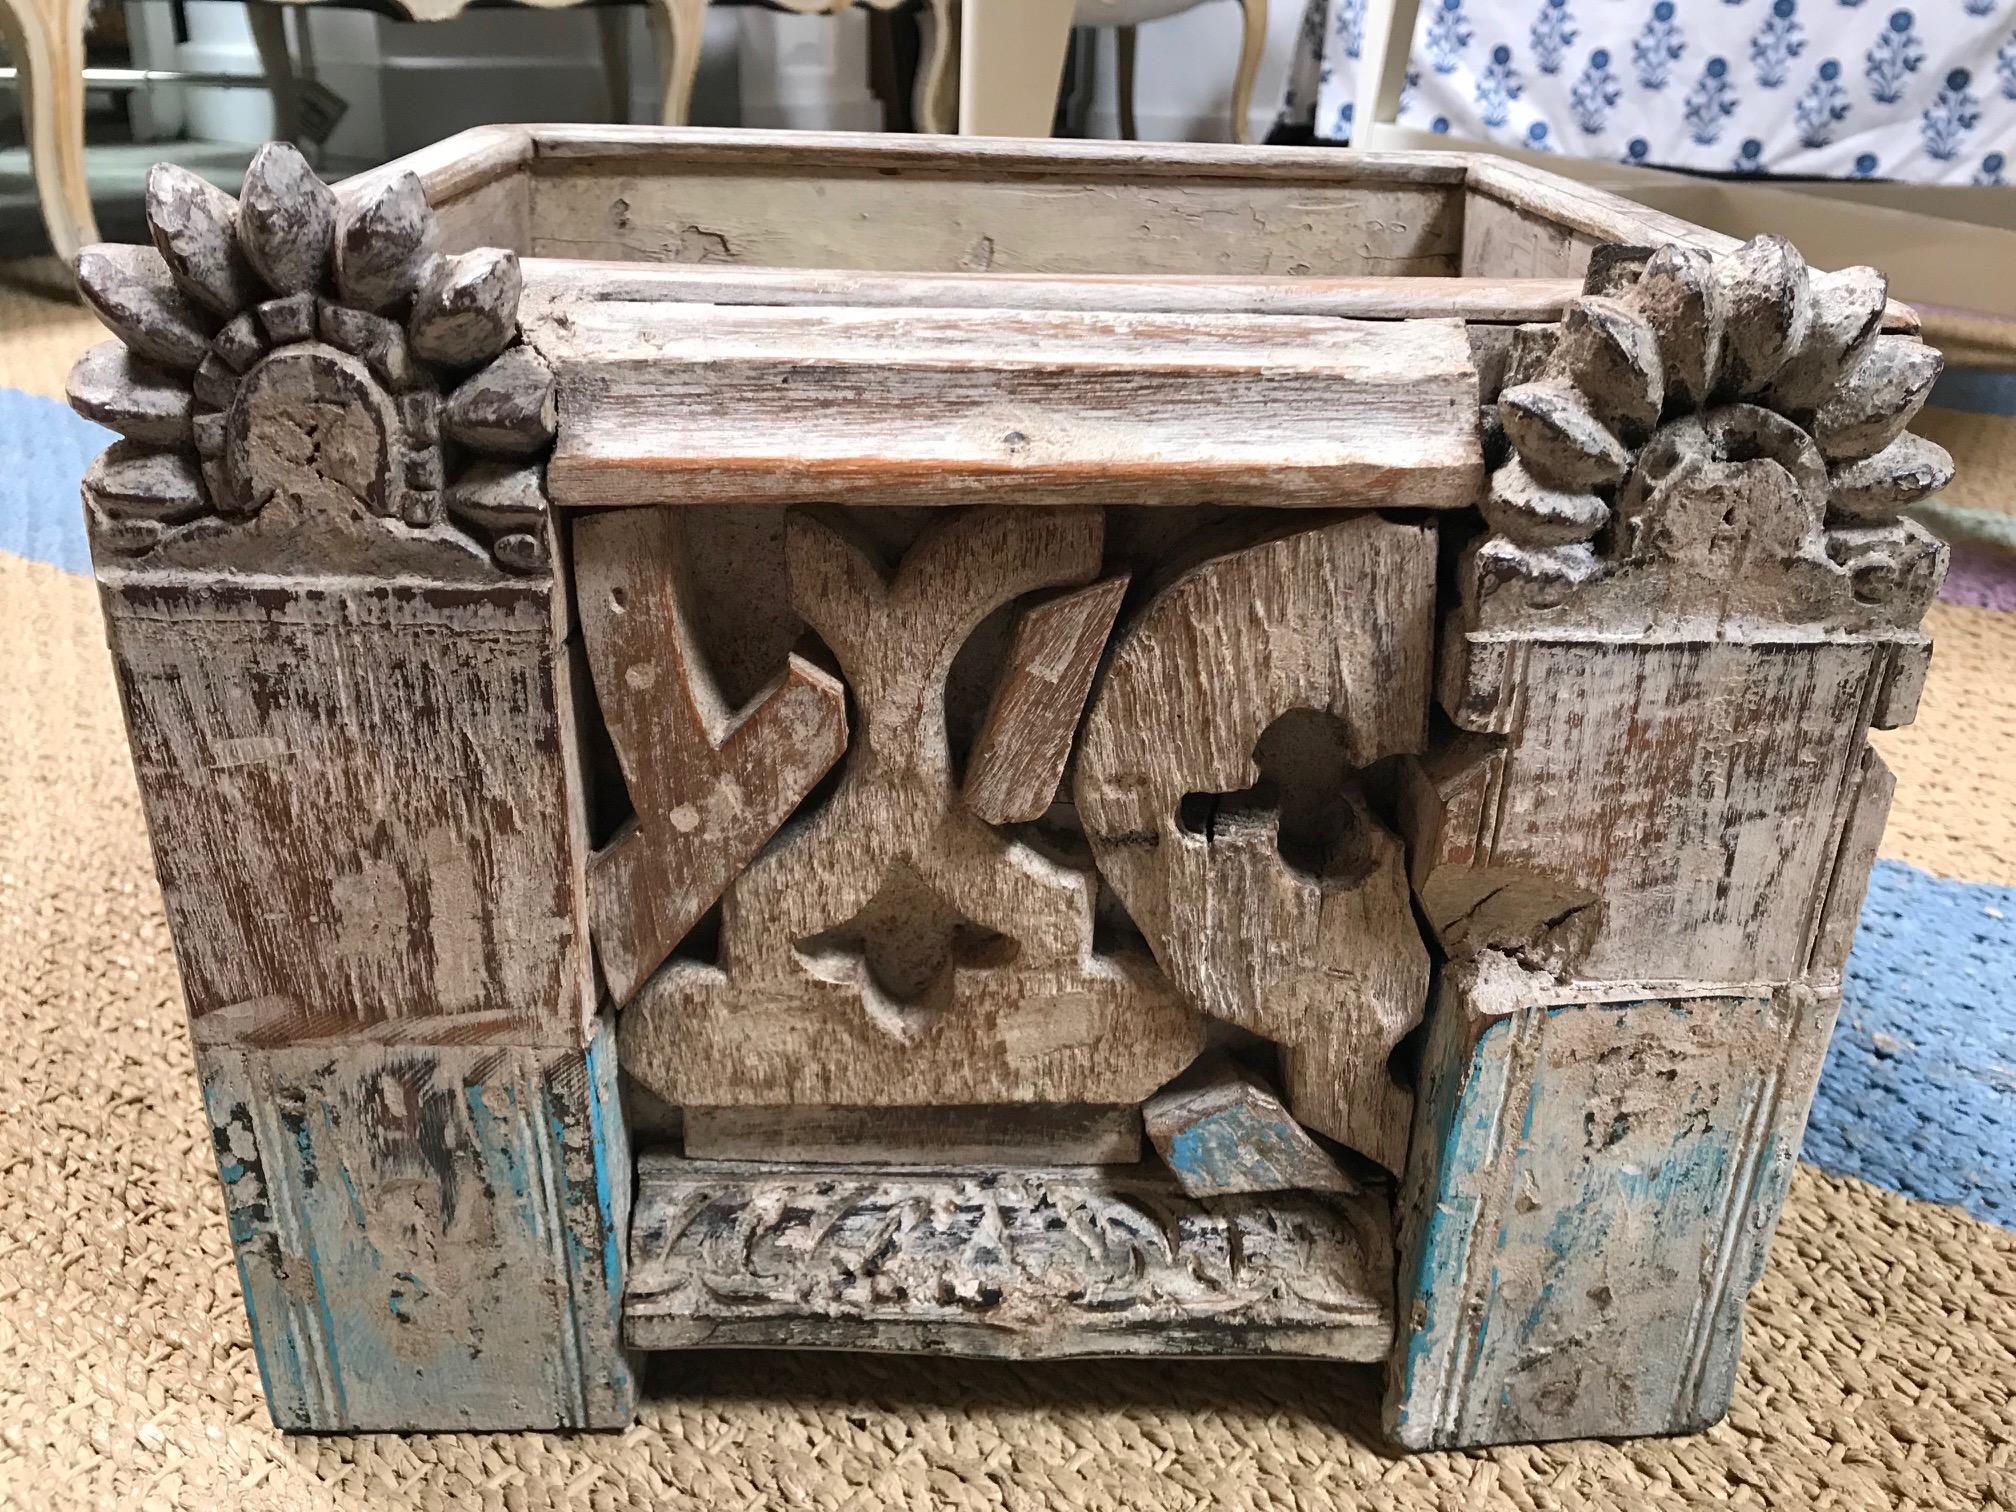 This sturdy box is slightly waxy to the touch. Giving light to the olden way of preserving carved wood. There are blue pieces to this box that give off a cultural and exotic feel. The front facade is pieced together with remnants of another life.